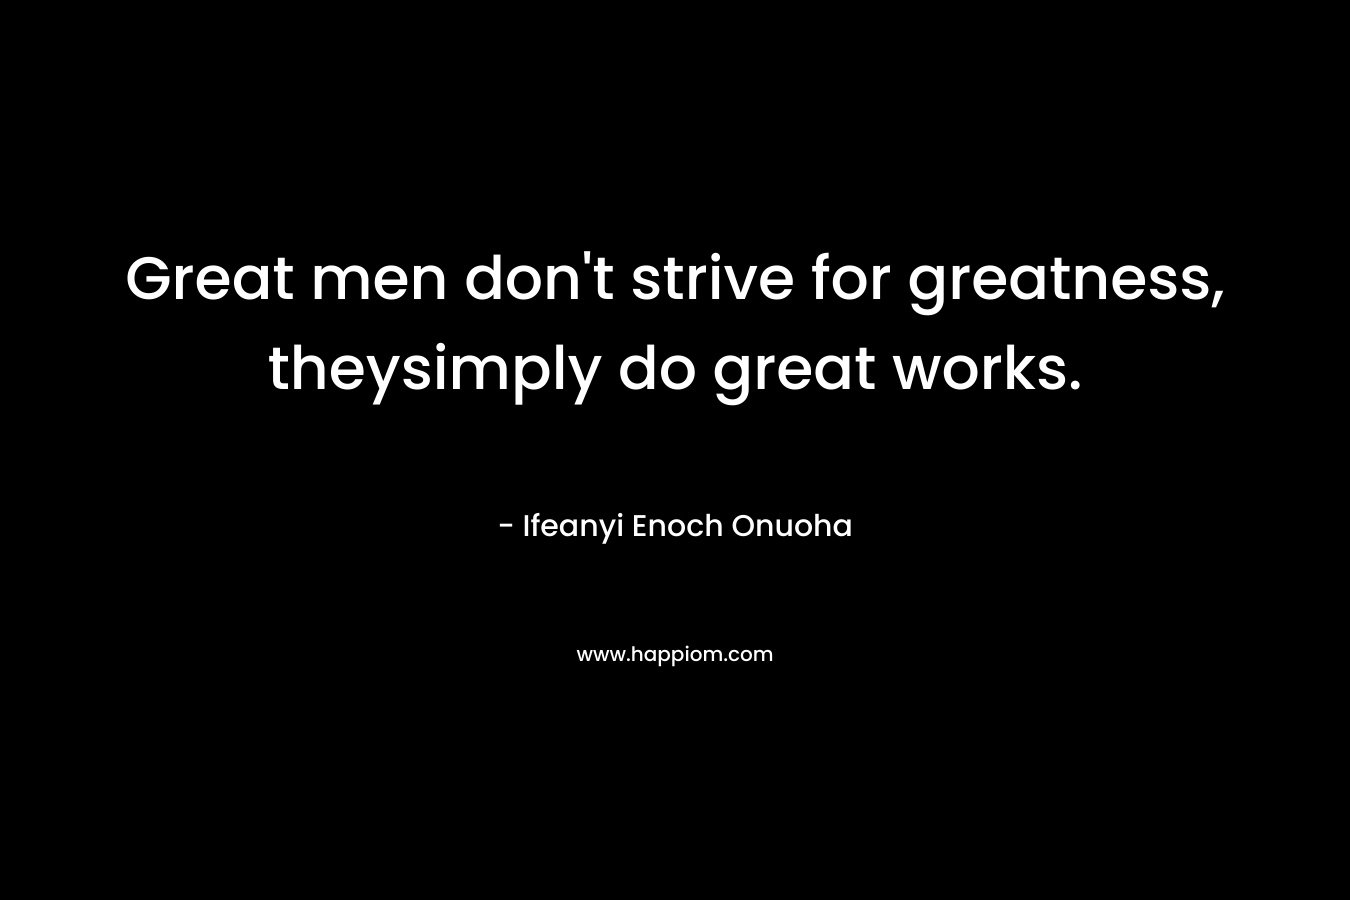 Great men don't strive for greatness, theysimply do great works.